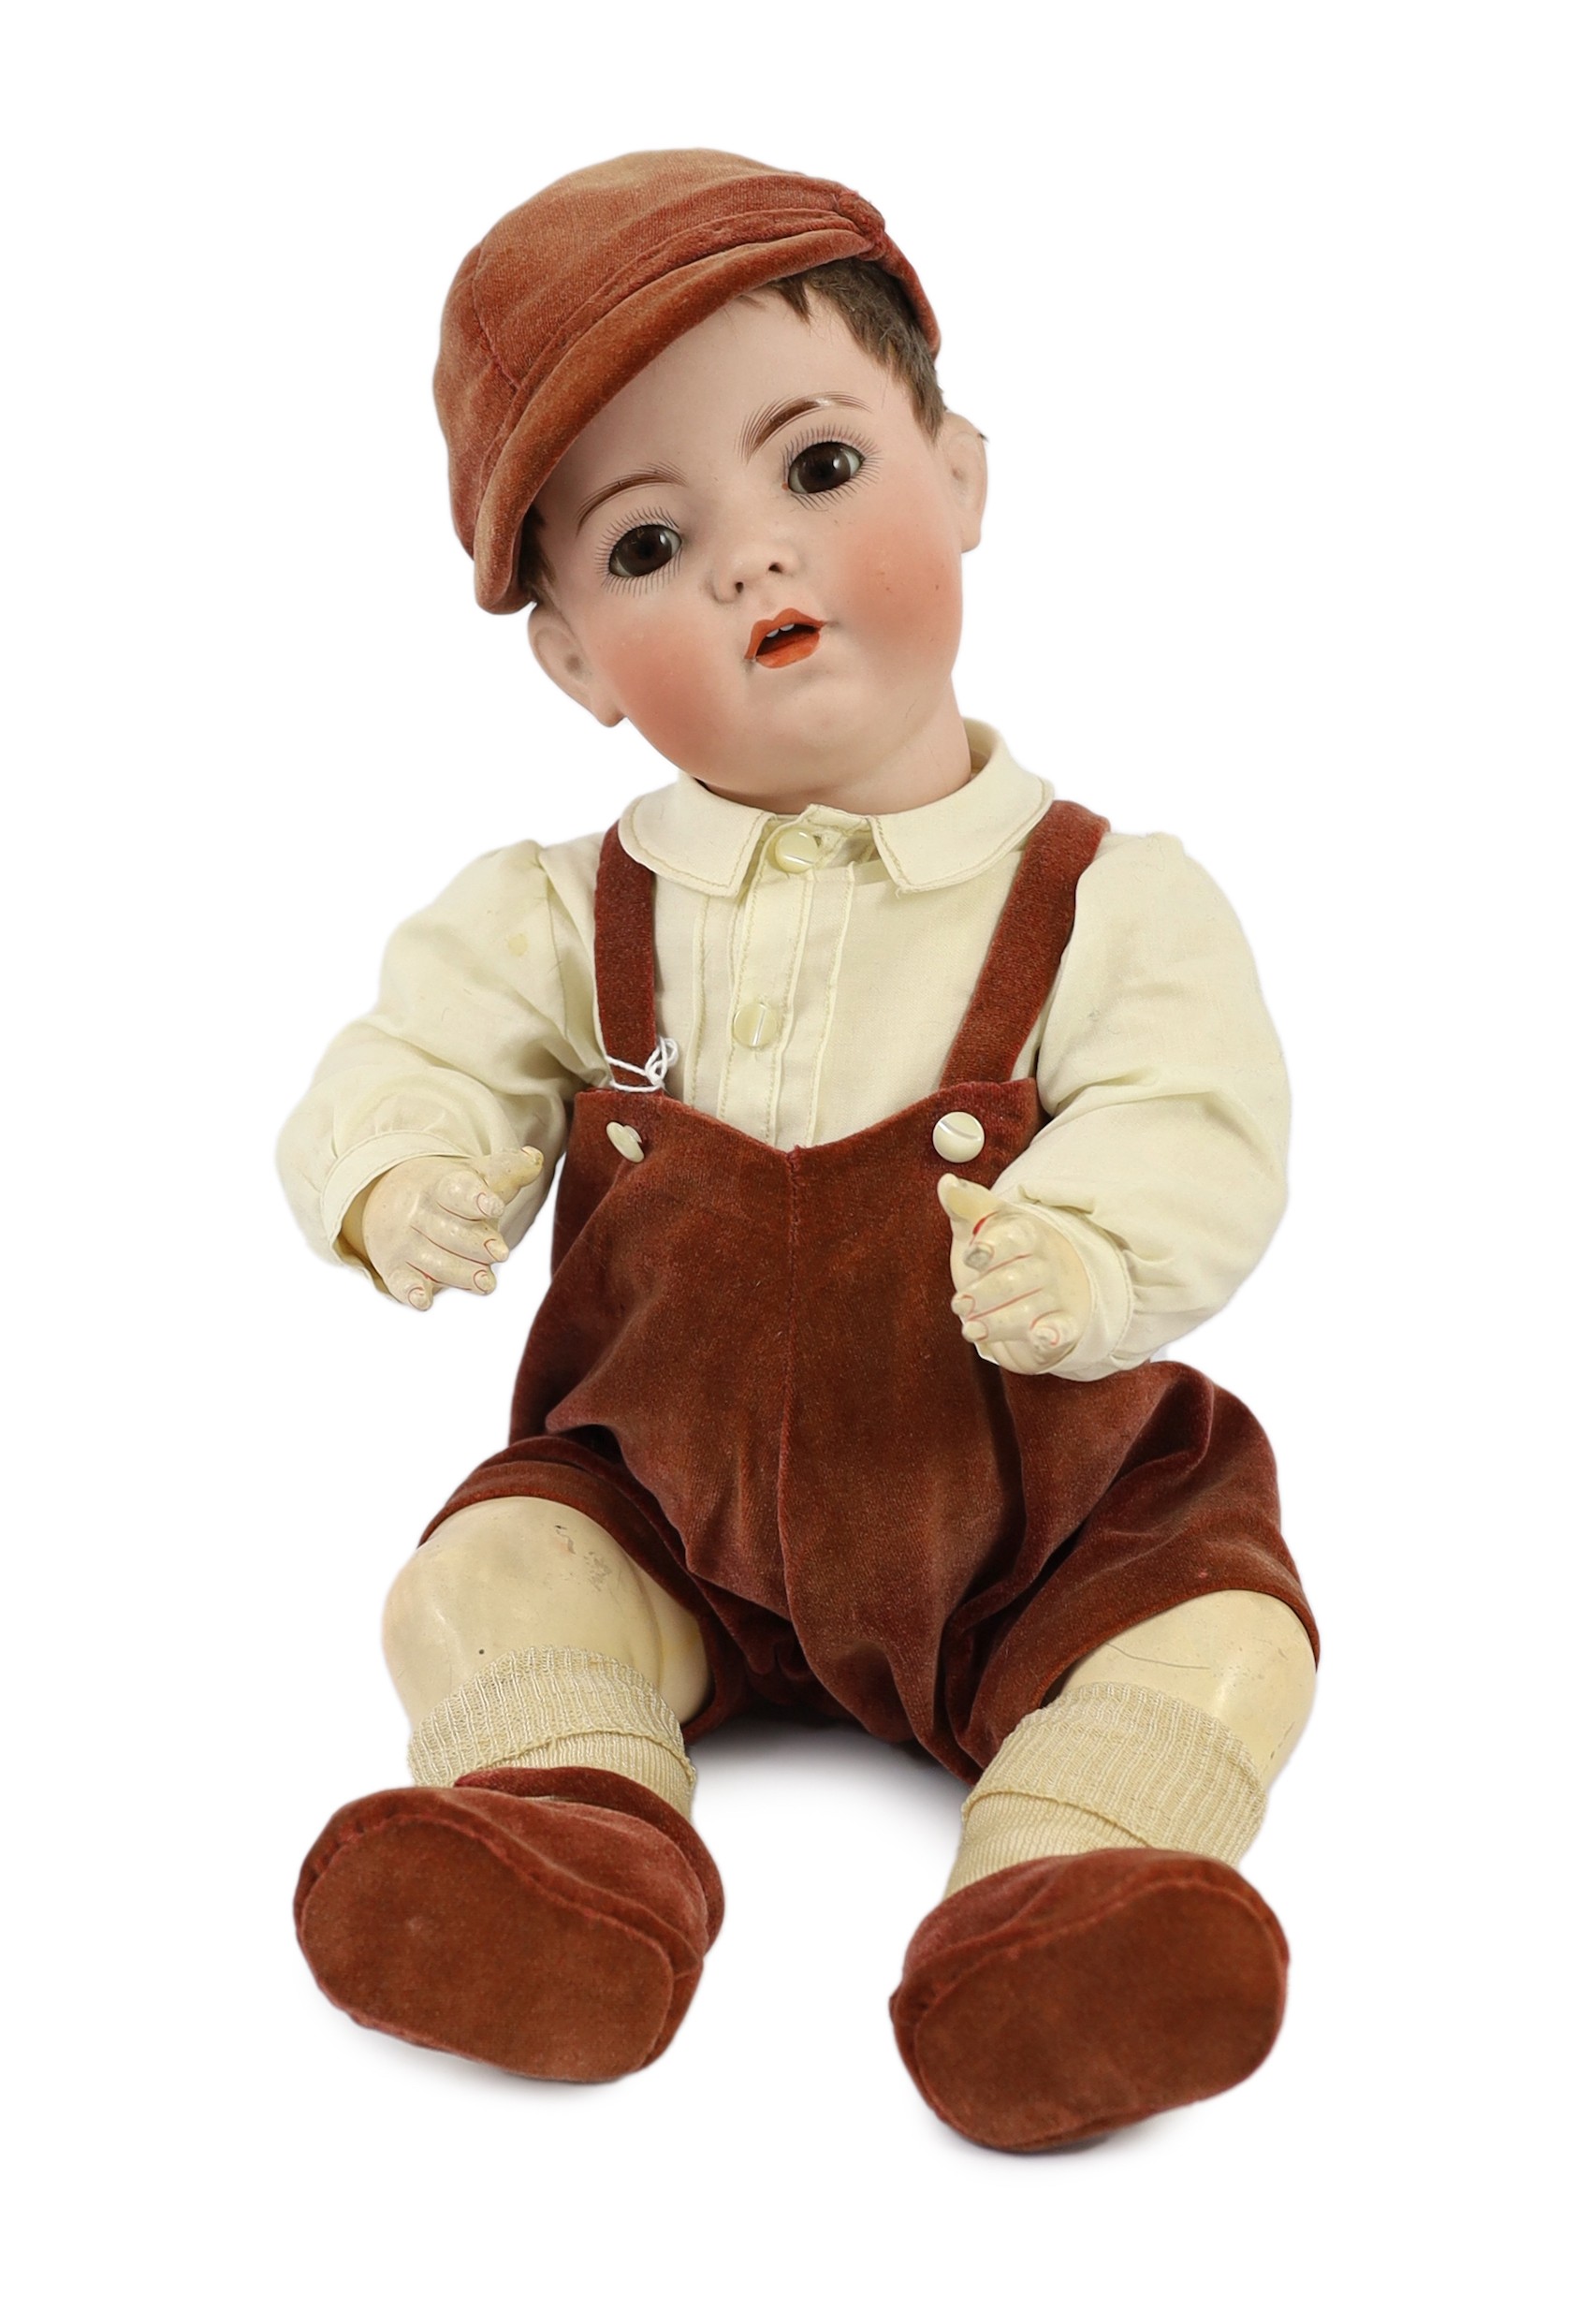 A Simon & Halbig for Franz Schmidt bisque character doll, German, circa 1912, 17in.                                                                                                                                         